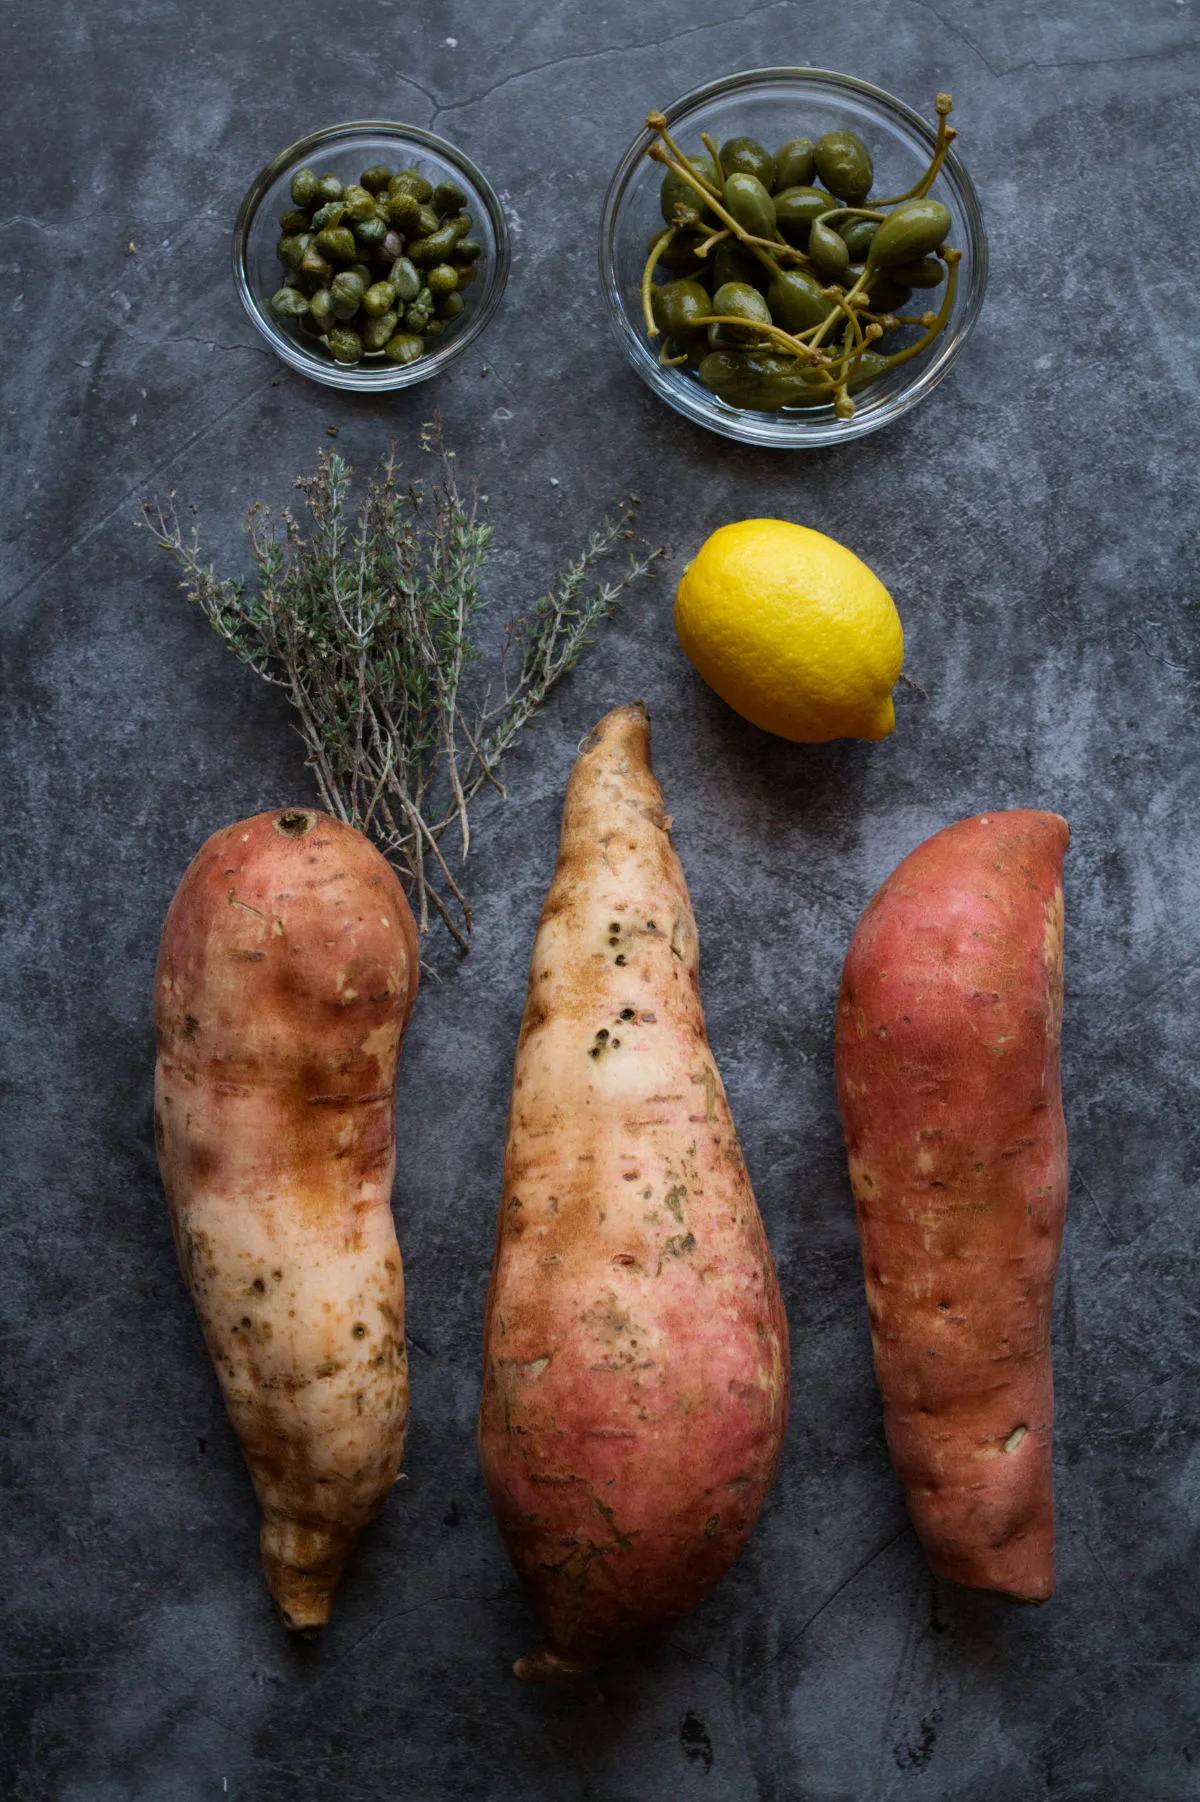 Sweet potatoes sit next to some lemon, fresh thyme, and capers.